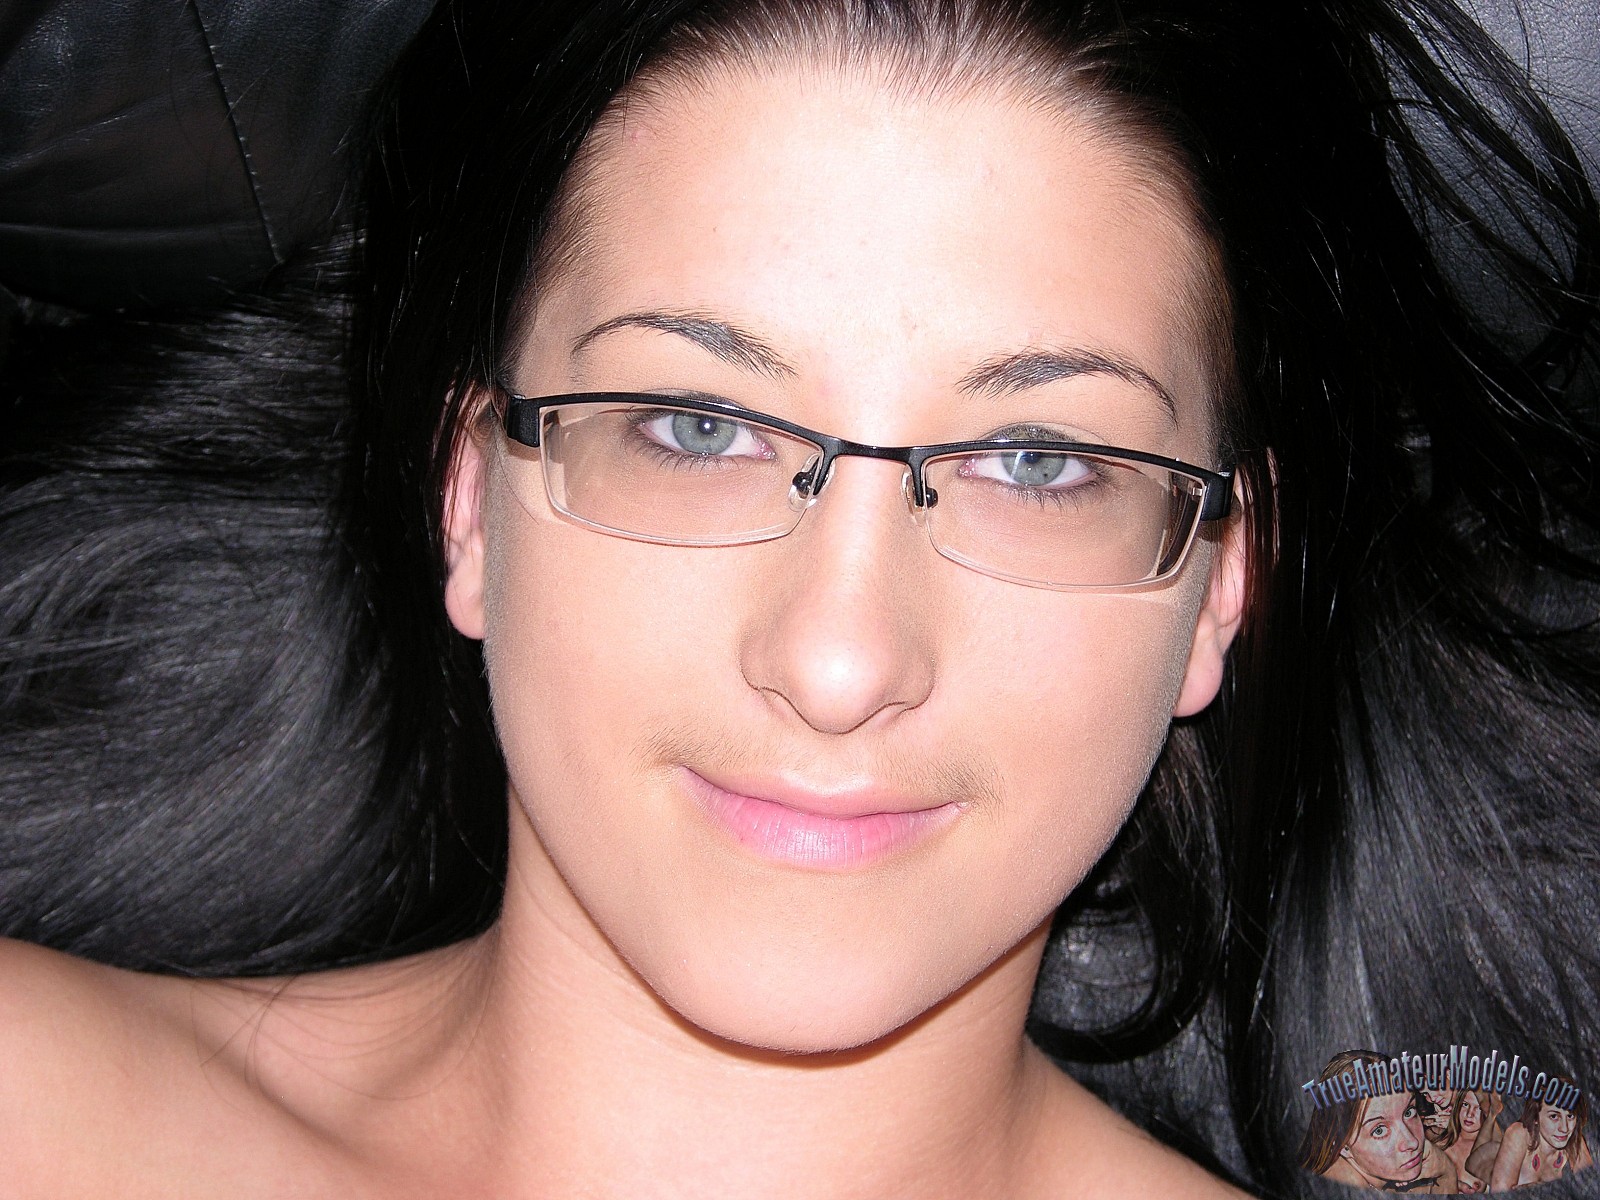 Sexy Girls wearing Glasses Page 286 Freeones Forum pic